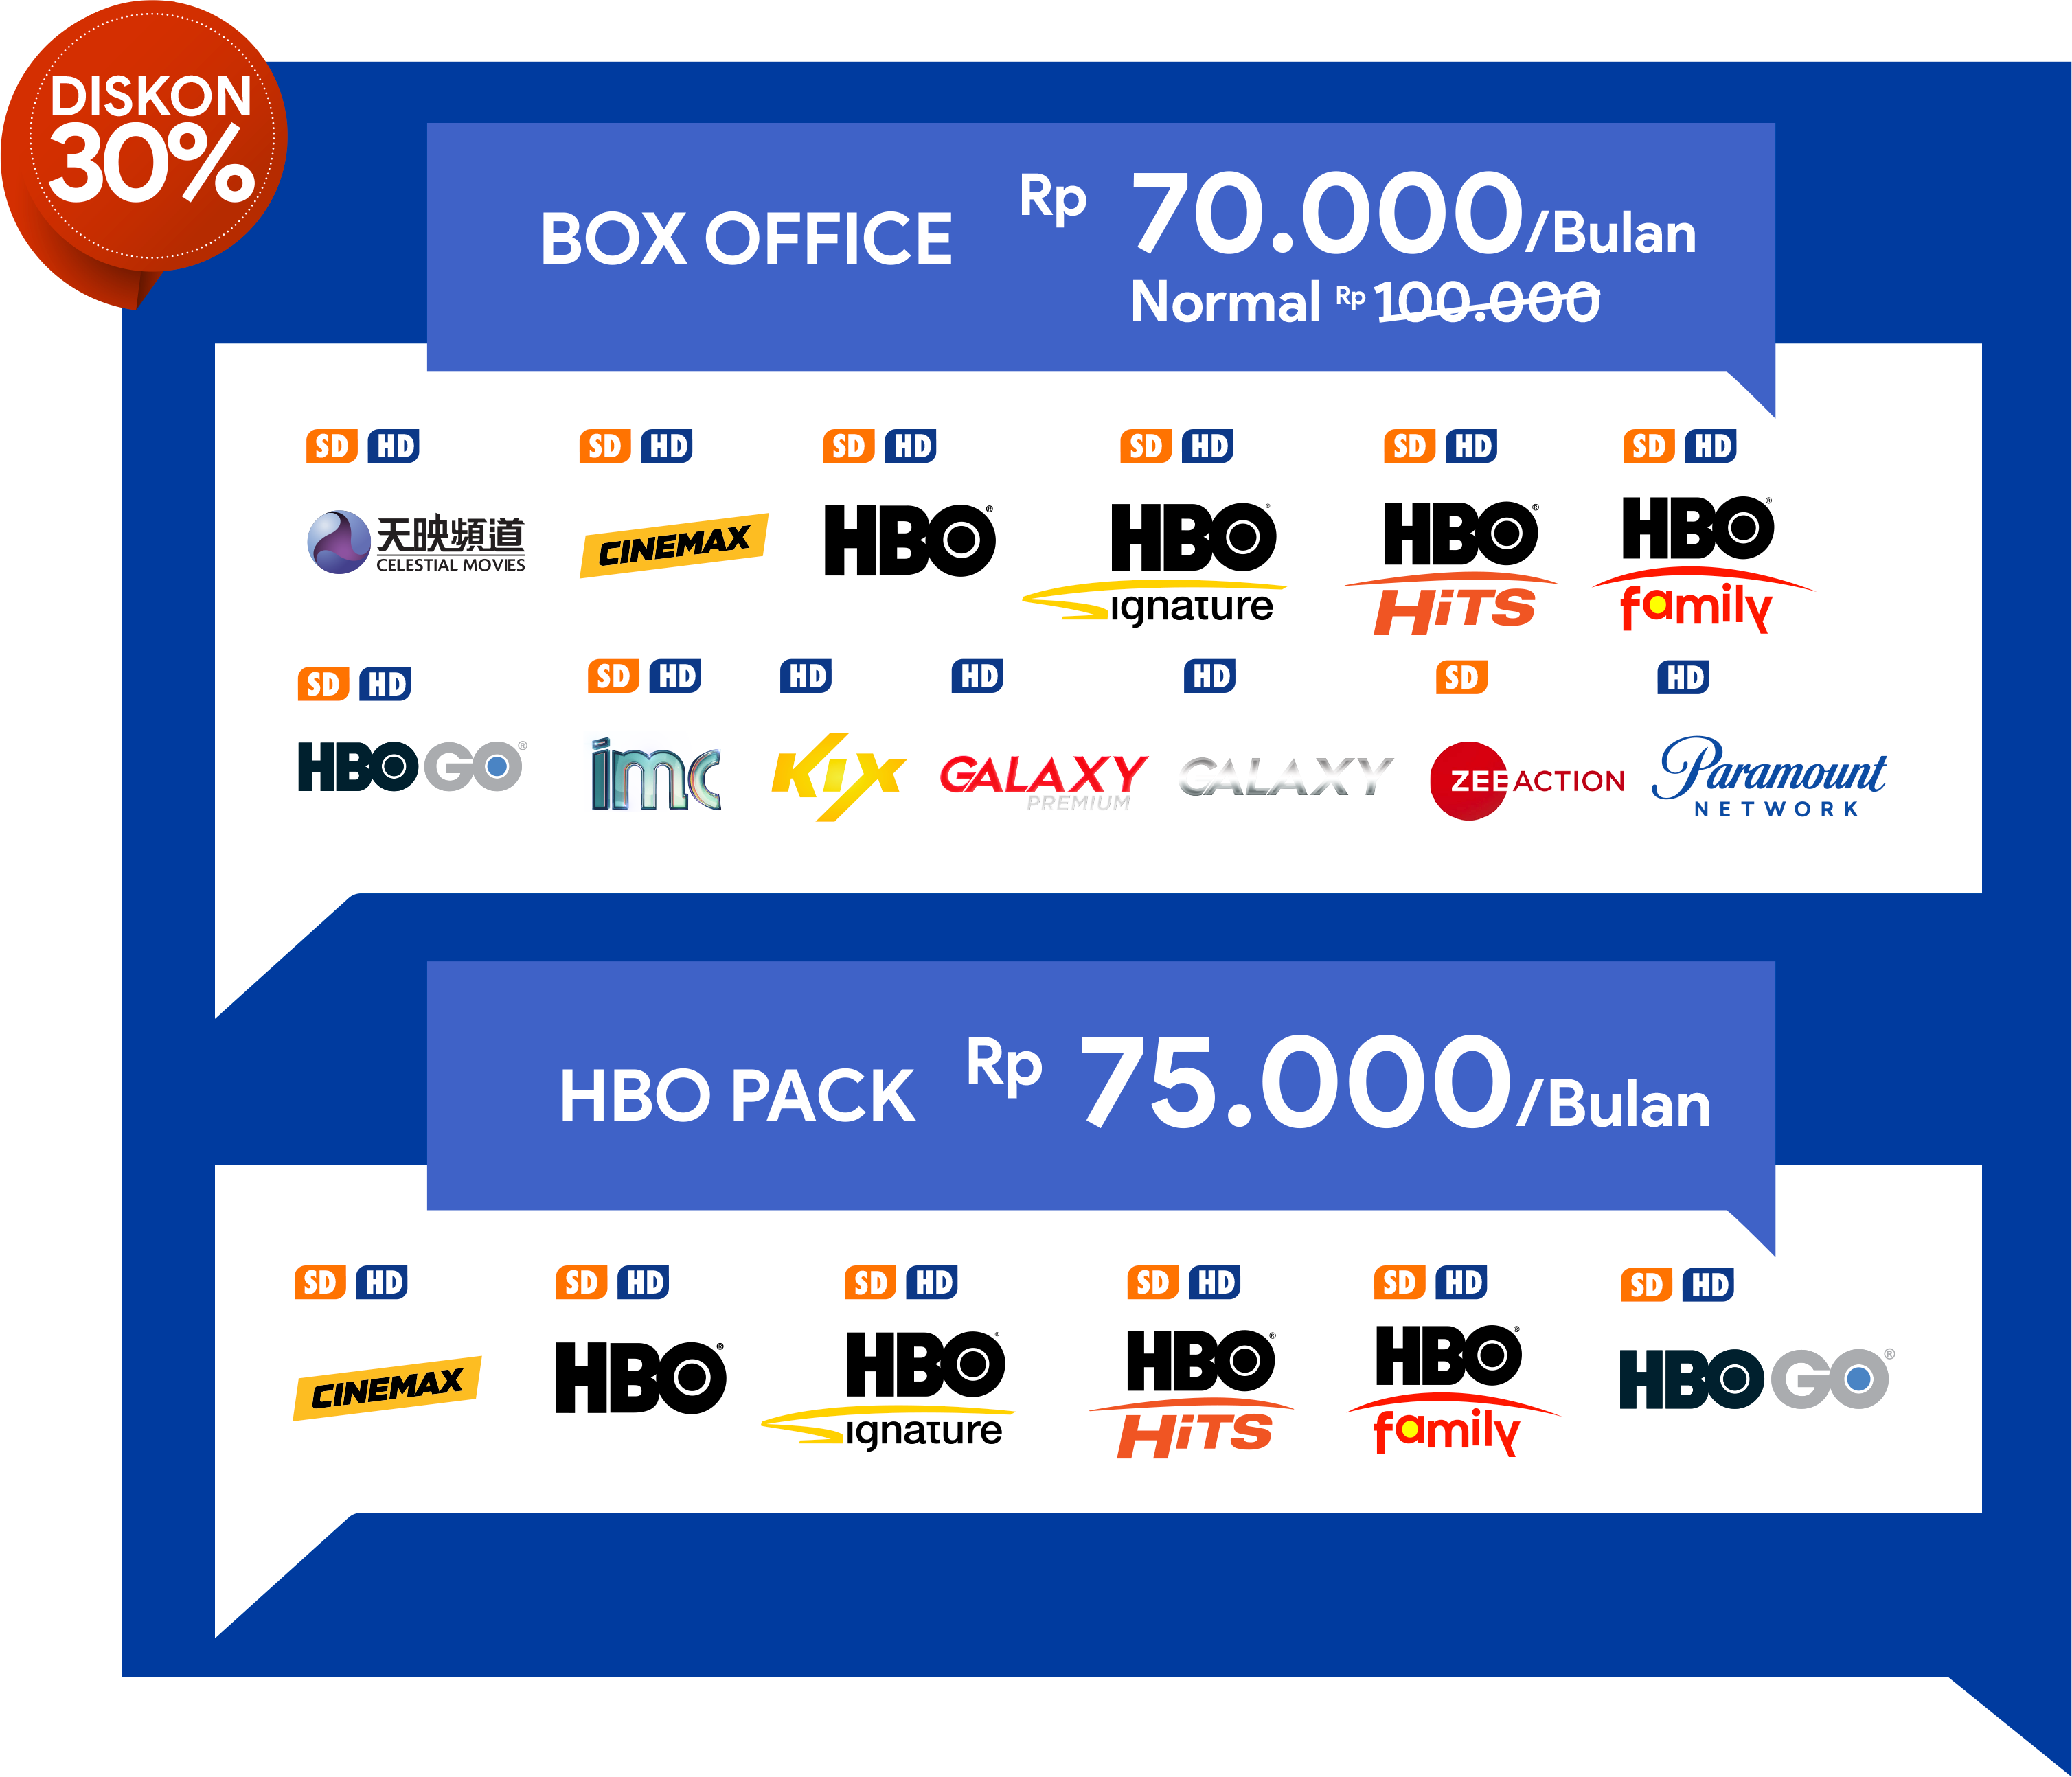 Box Office Pack - HBO Pack